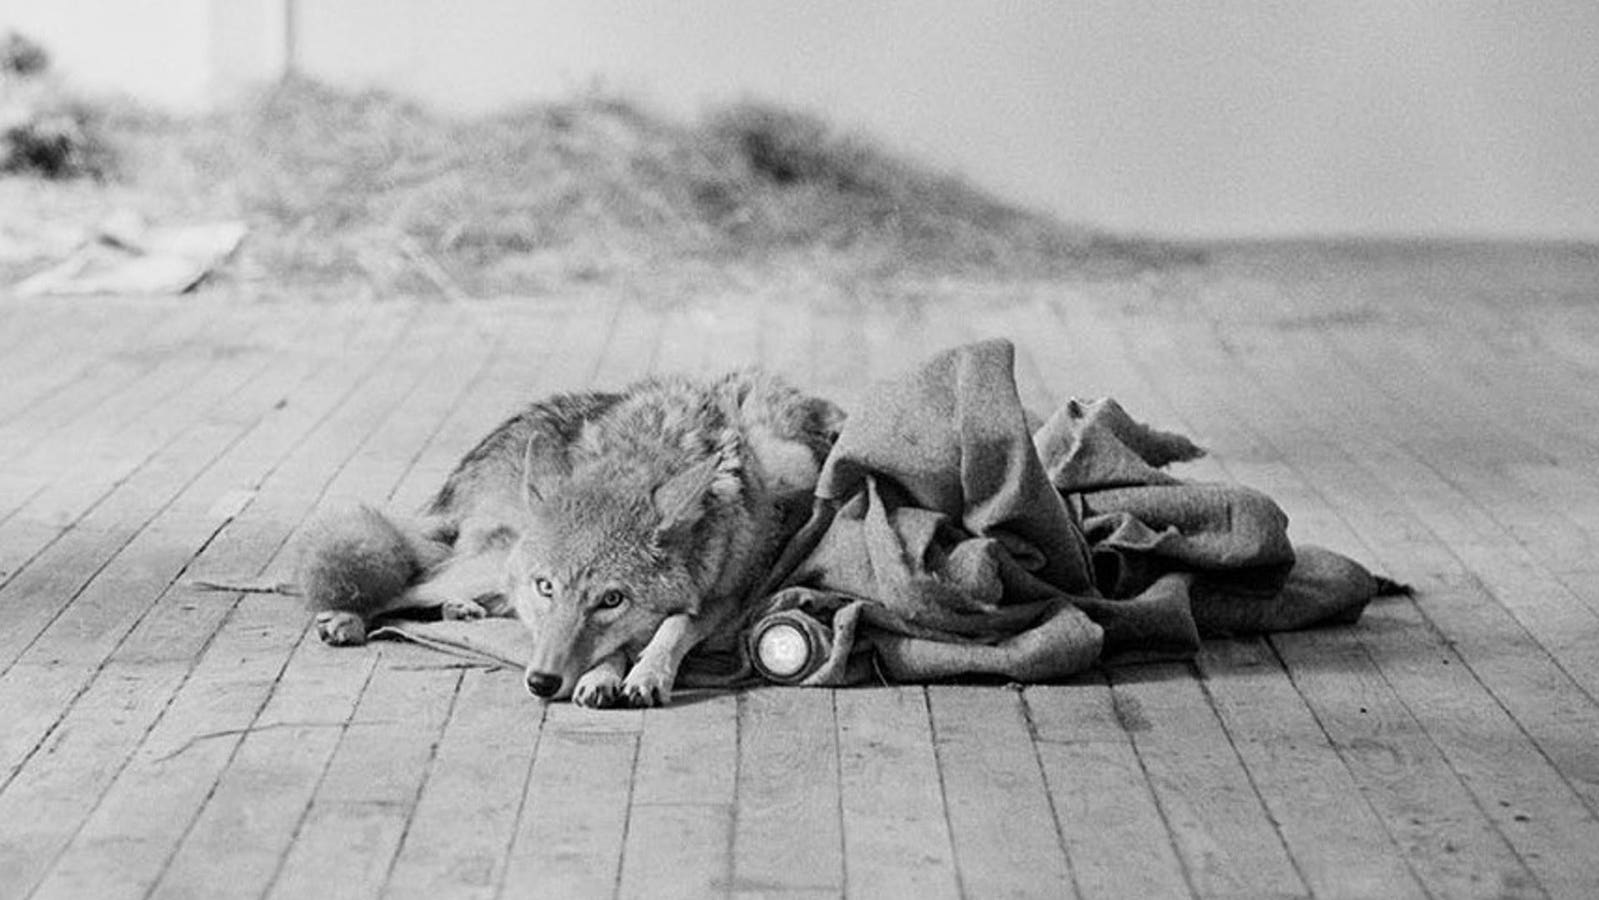 ‘You Like It. It Likes You’: Stephen Aiken’s ‘Coyote’ Photographs